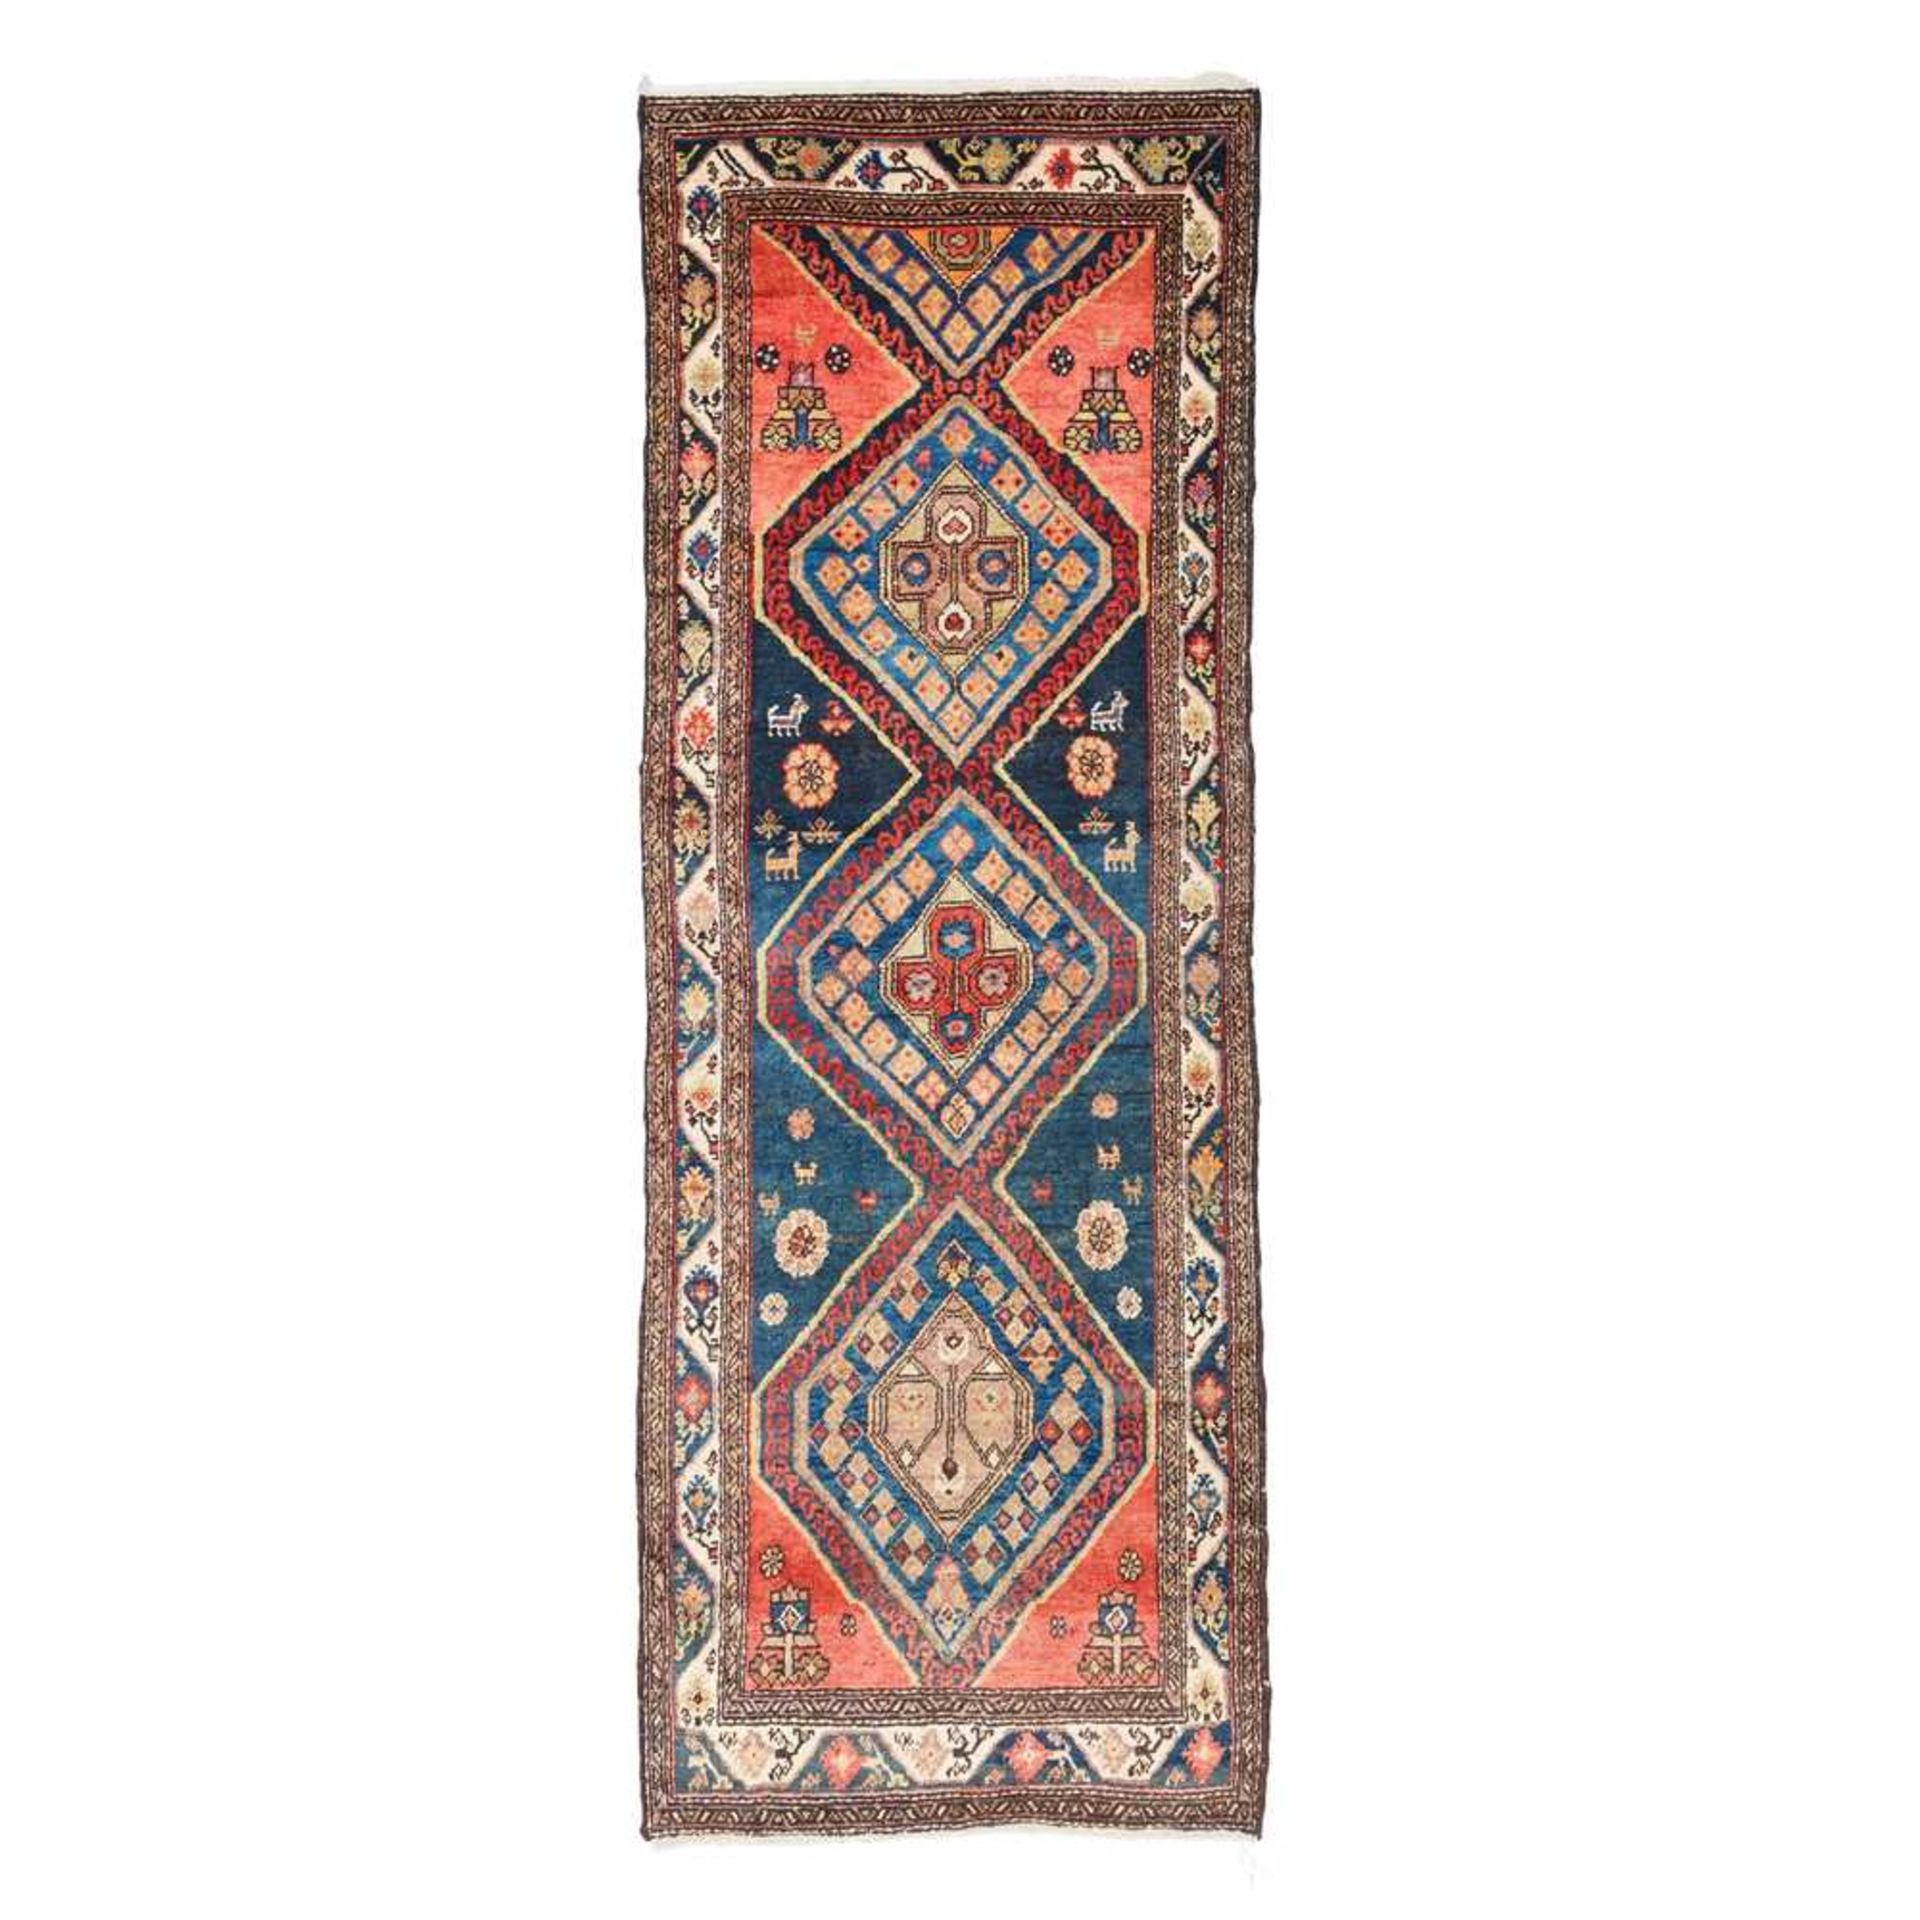 MALAYER RUNNER WEST PERSIA, LATE 19TH/EARLY 20TH CENTURY